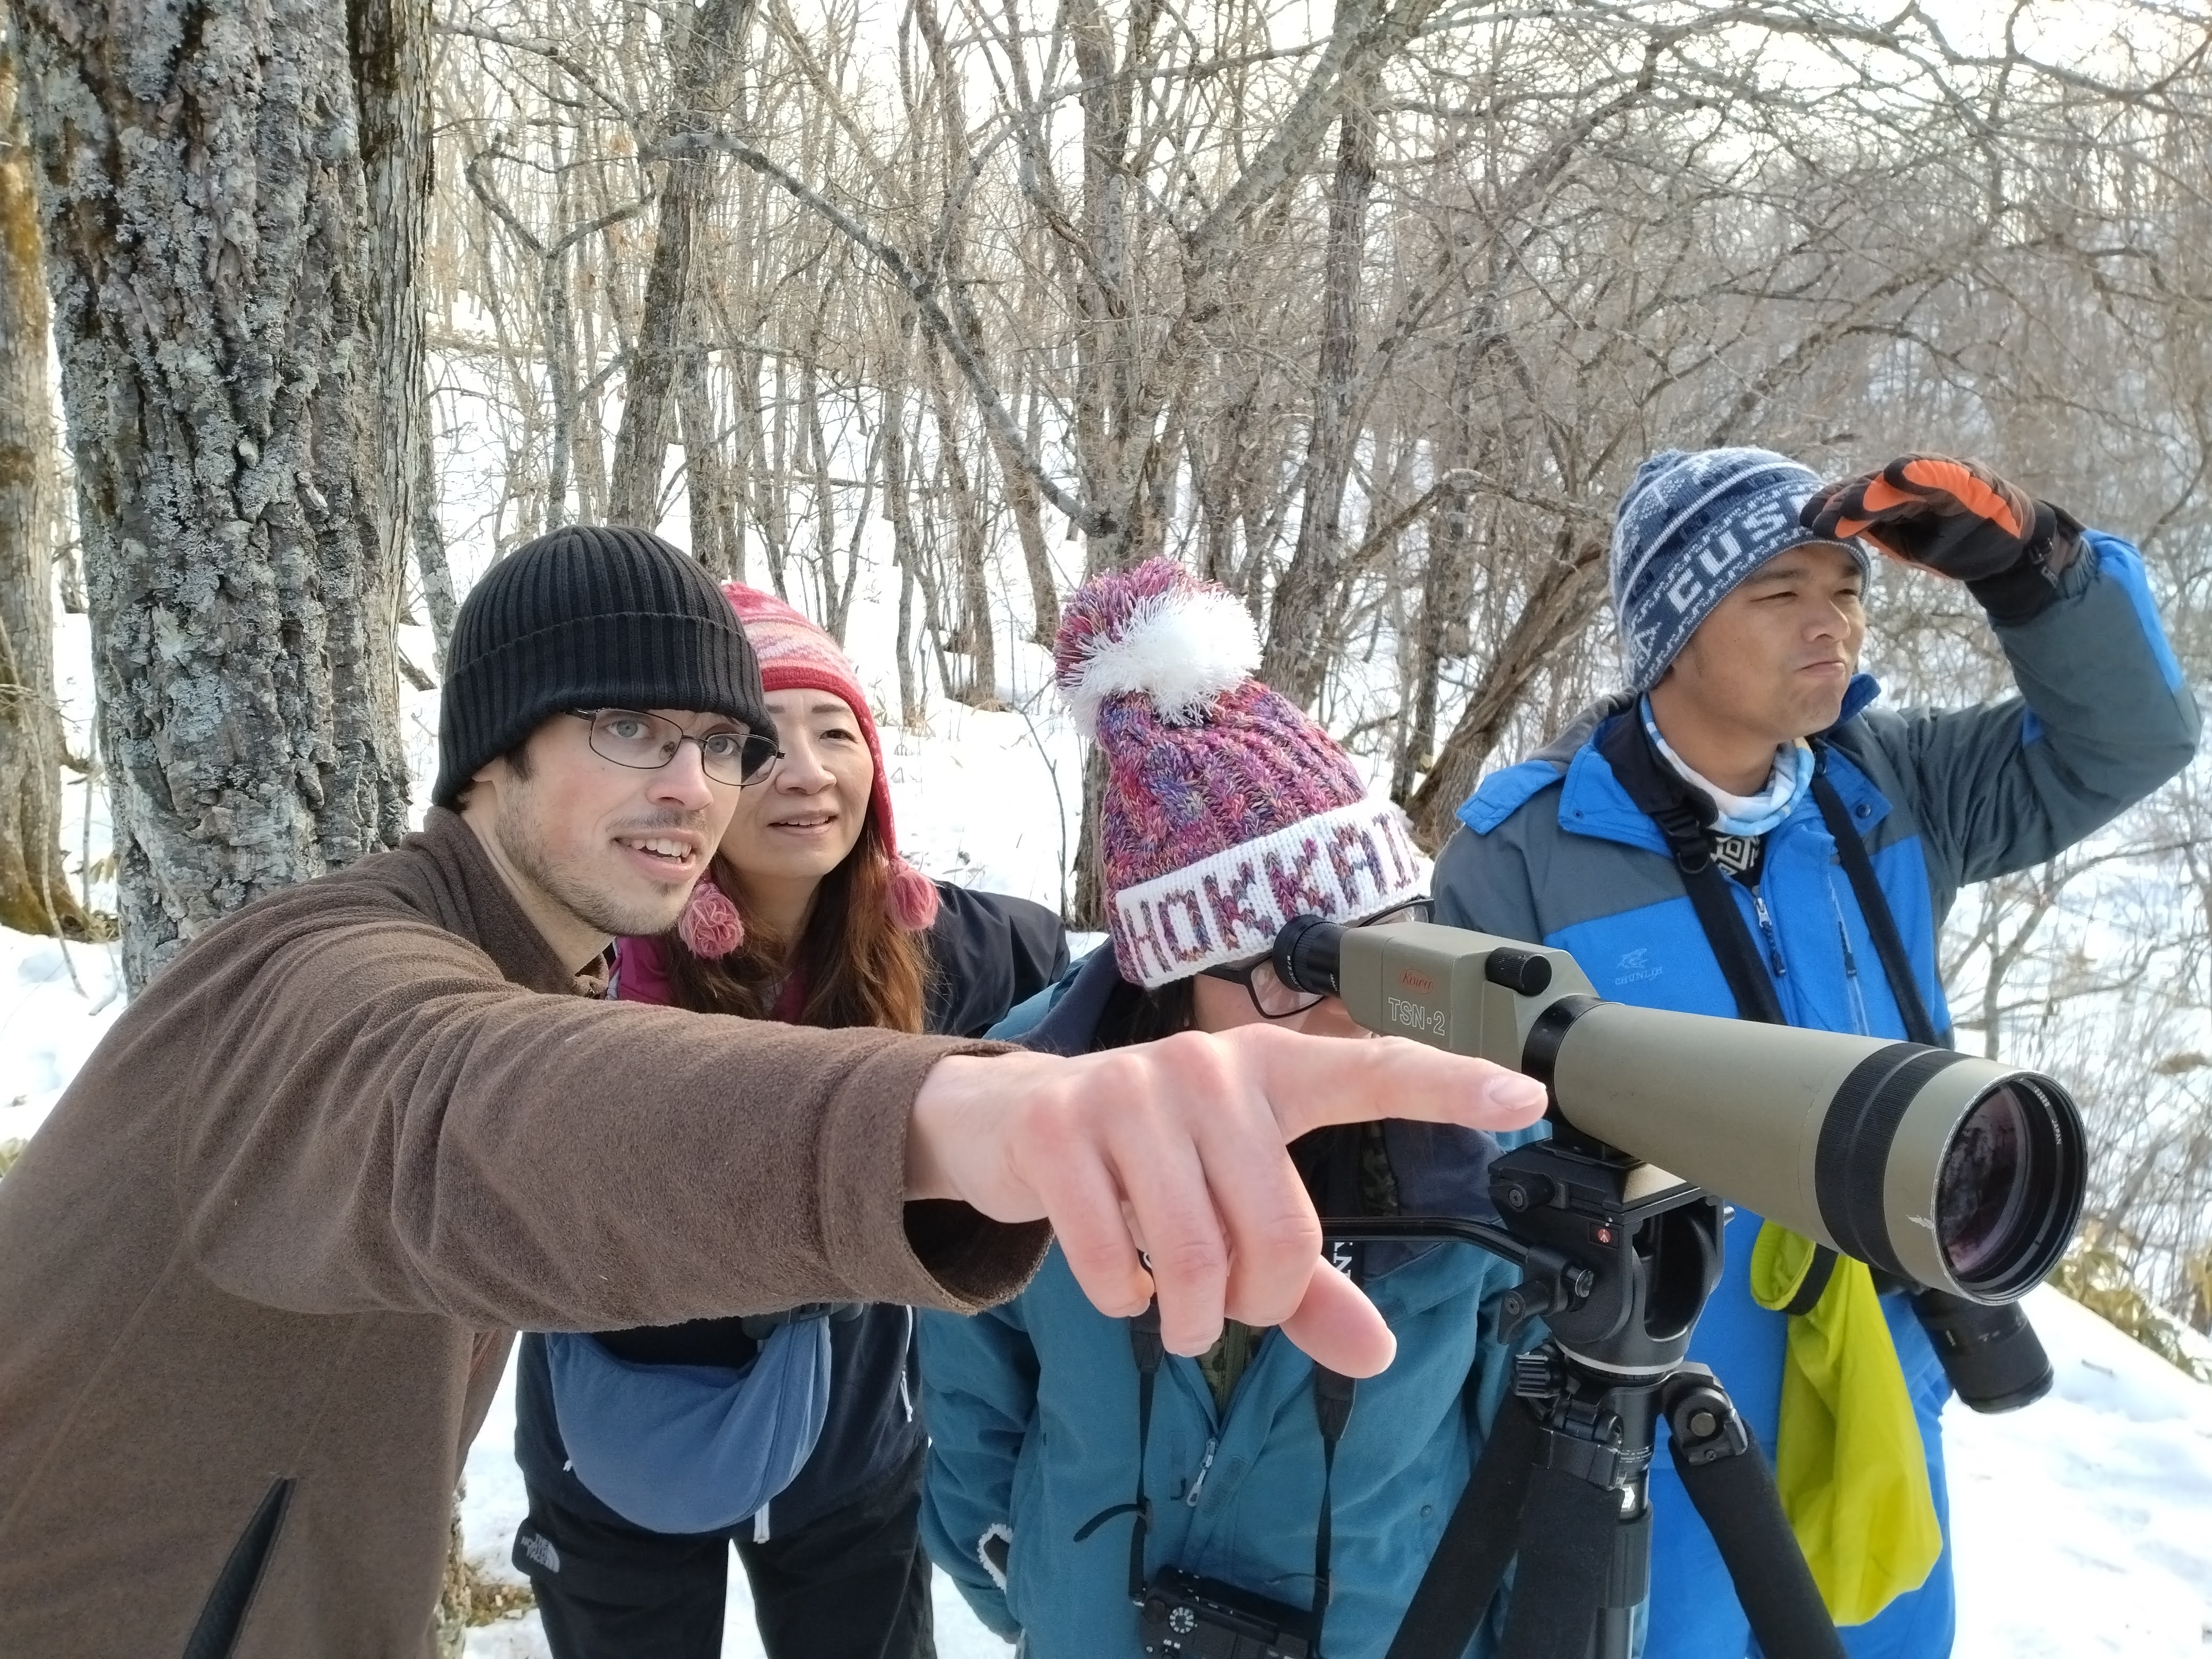 Adventure Hokkaido guide Zac explains natural features to guests looking through a telescopic lens.